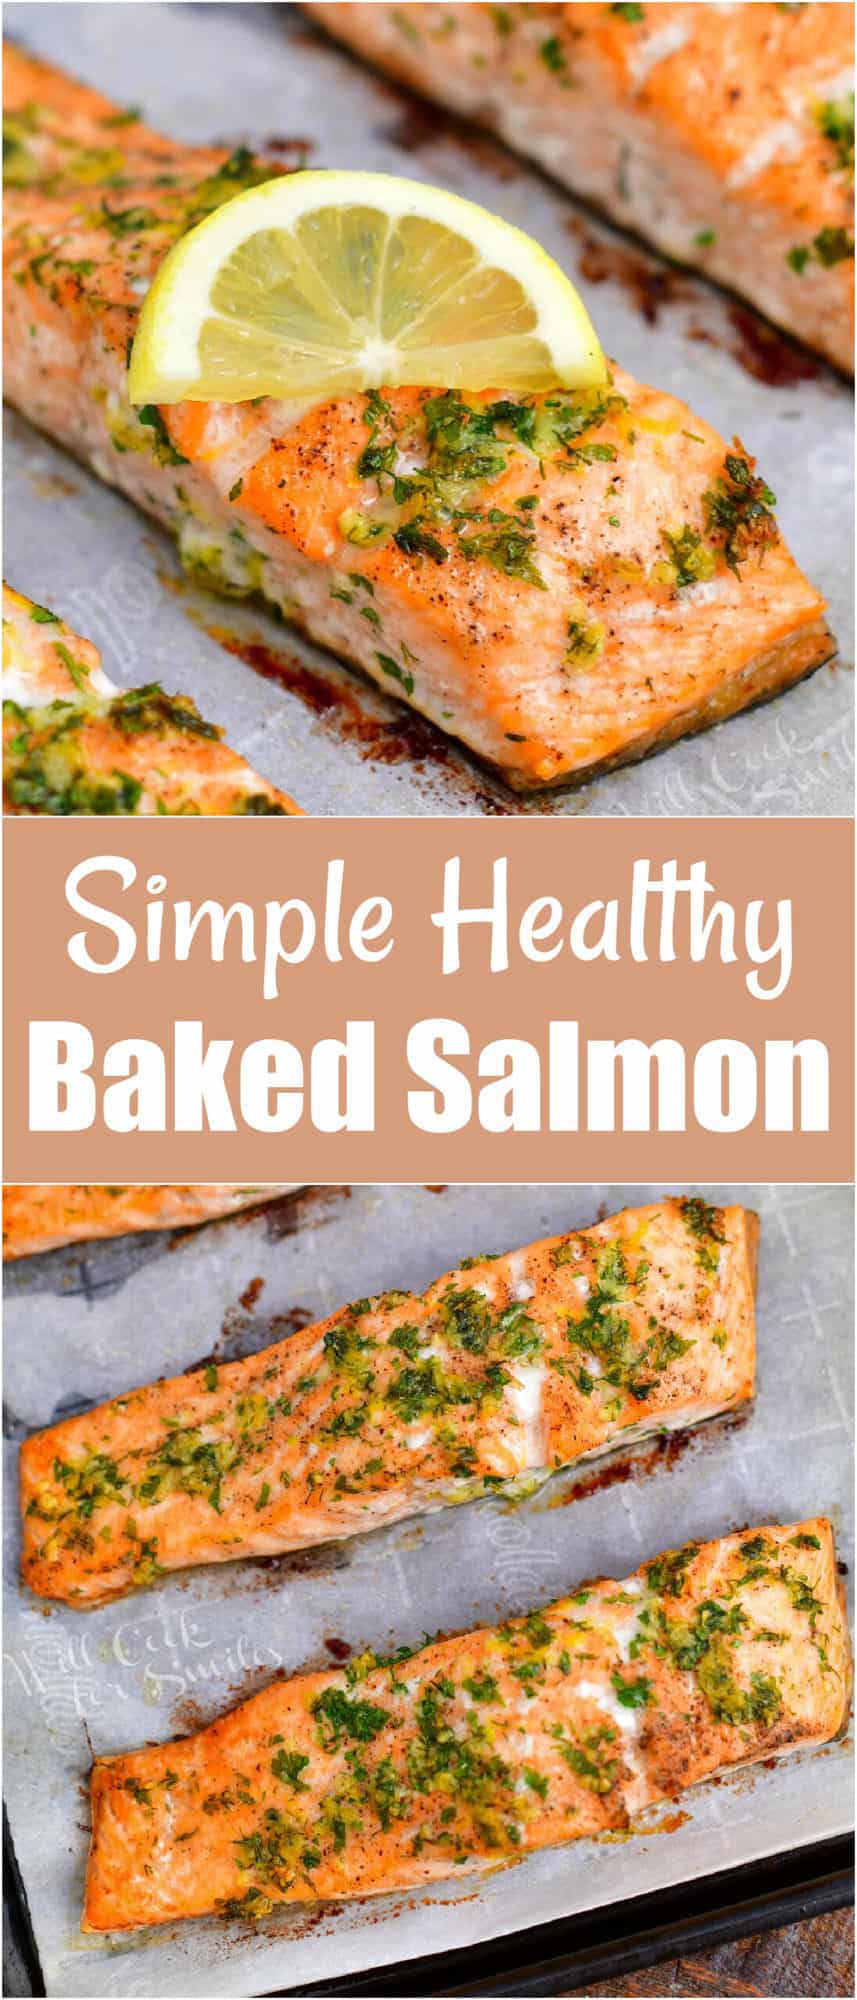 titled image for Pinterest (and shown): Simple Healthy Baked Salmon